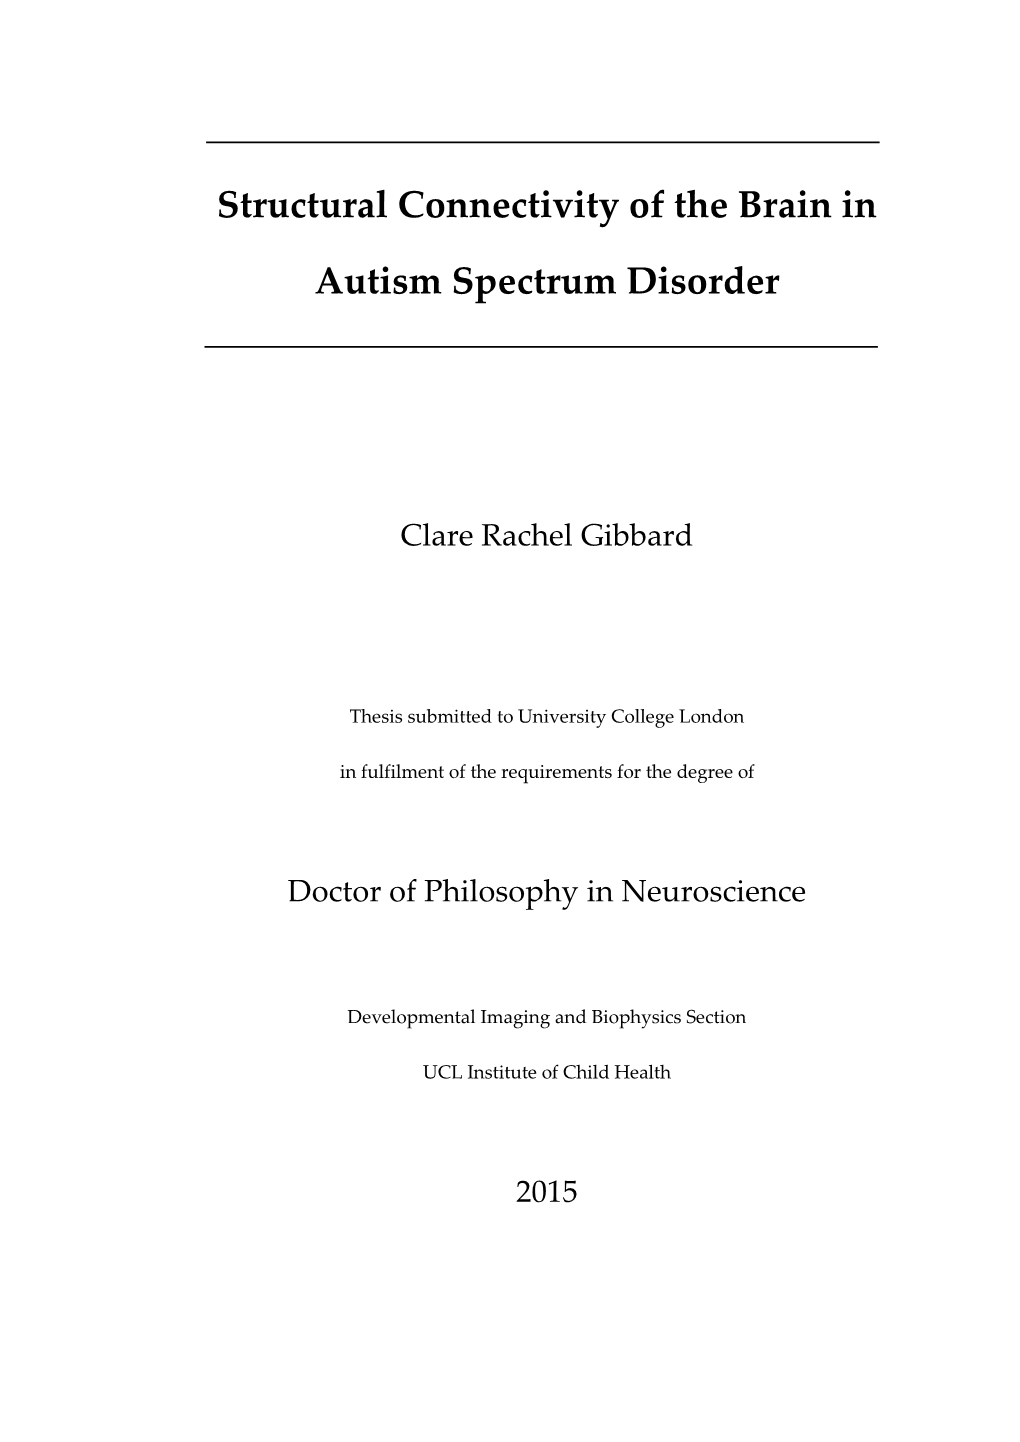 Structural Connectivity of the Brain in Autism Spectrum Disorder